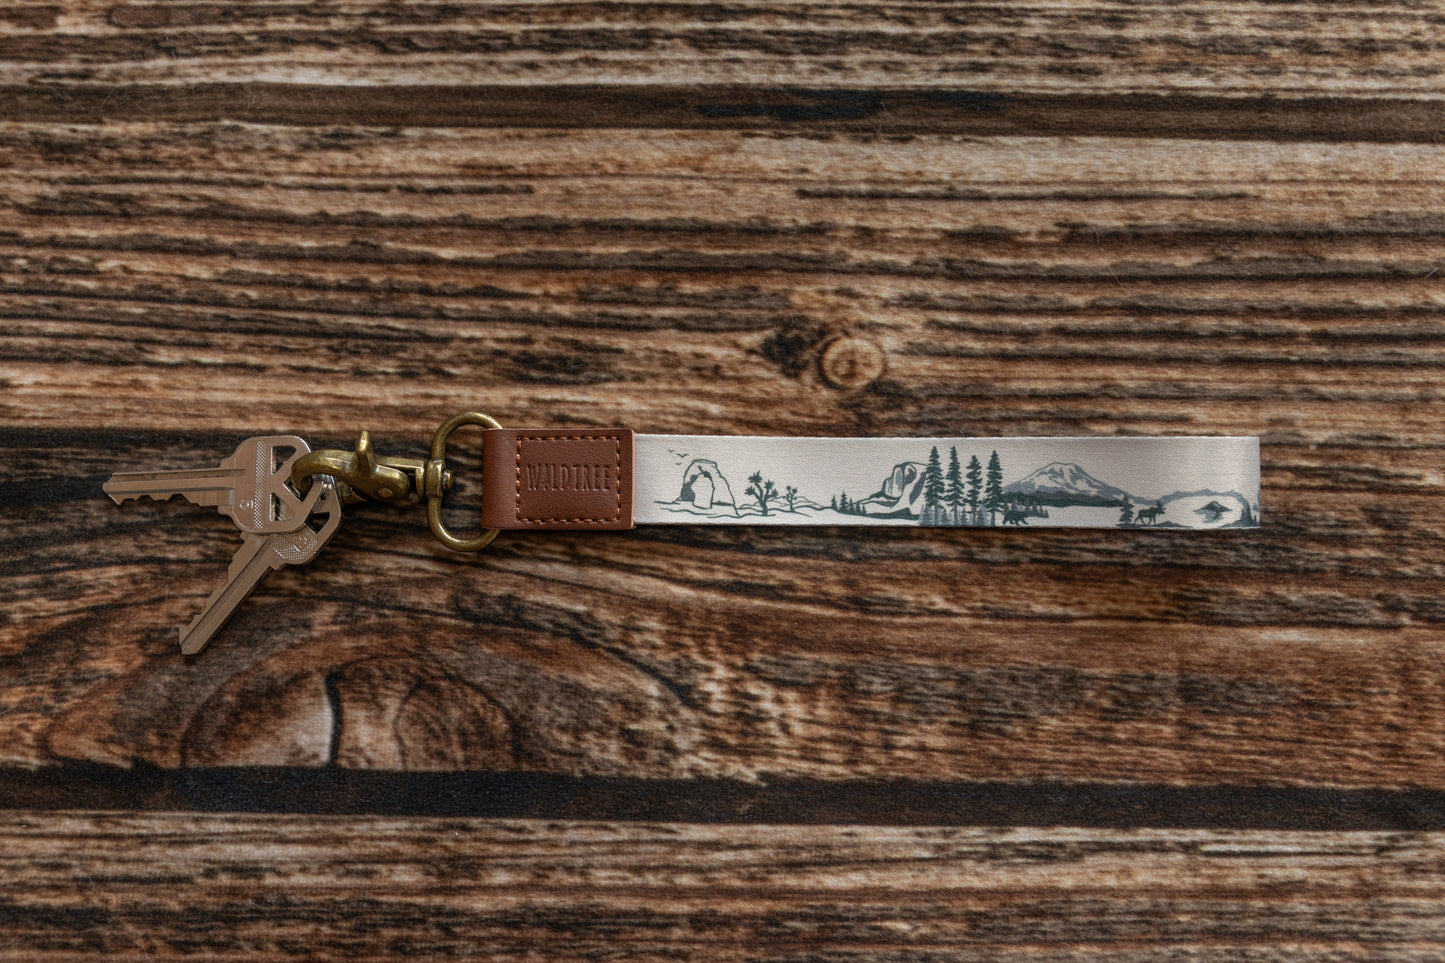 national park wristlet keychain laying on wood floor